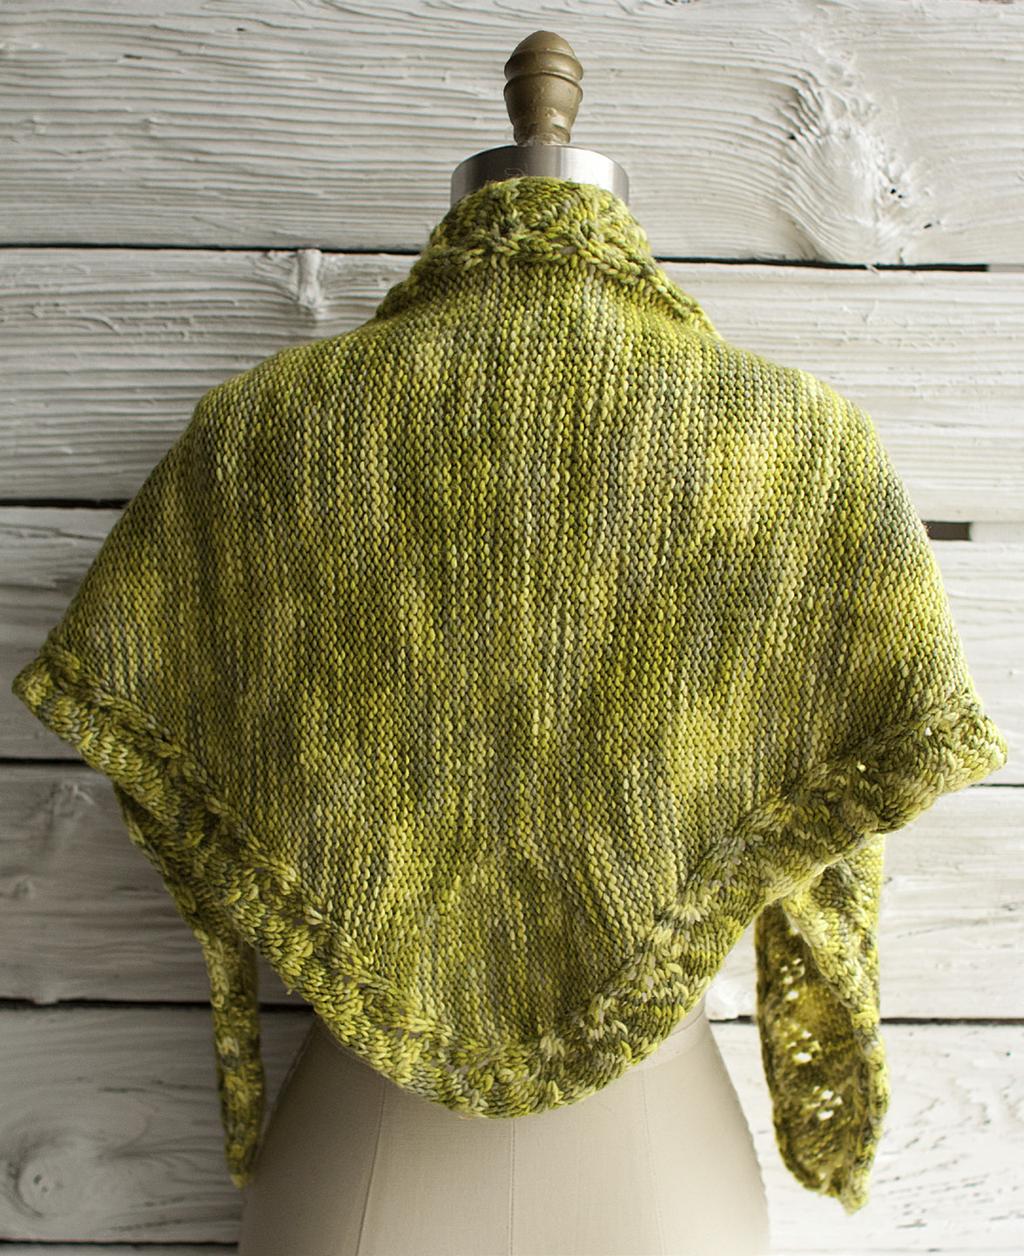 SIZE 51 wingspan, 19.5 depth MATERIALS Manos del Uruguay MAXIMA (100g, approx. 218yds; 100% merino wool), 2 sk. Shown in M6353 Key Lime.